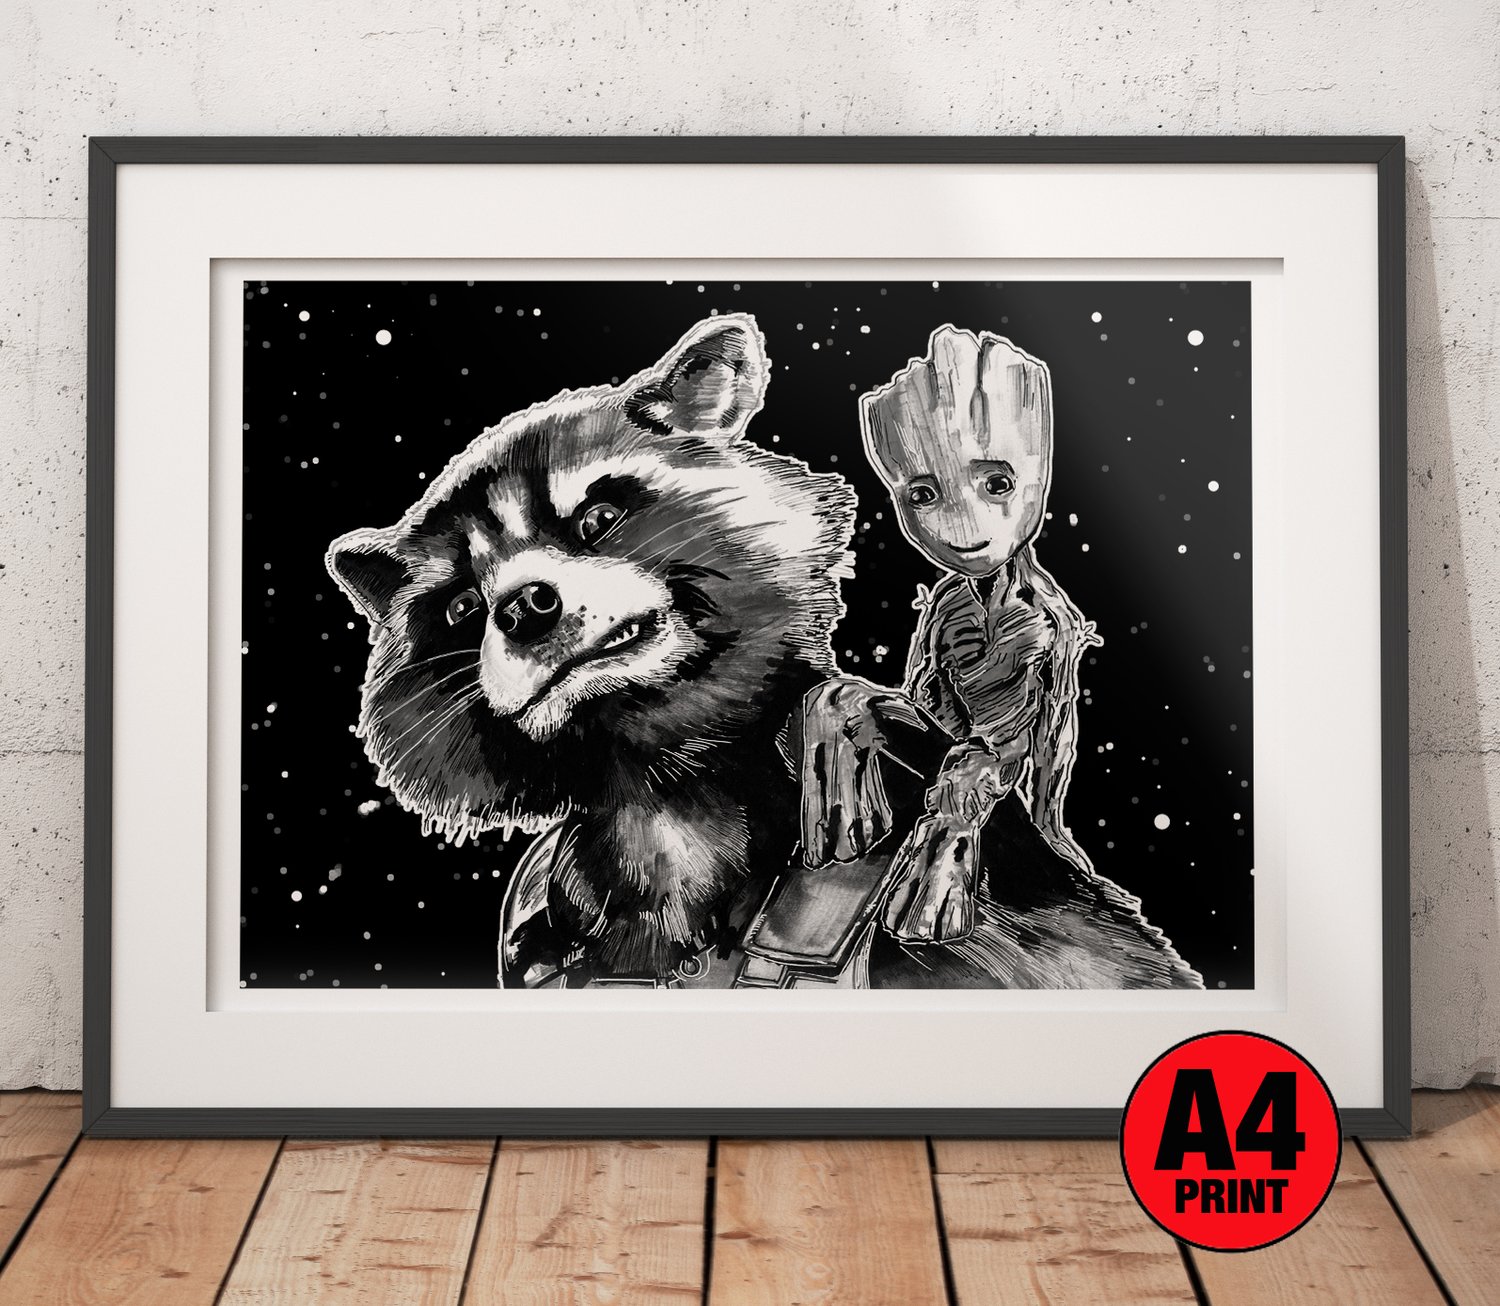 GOTG 'Rocket & Groot' A4 (12" x 8") Signed Print Comic Style Illustration